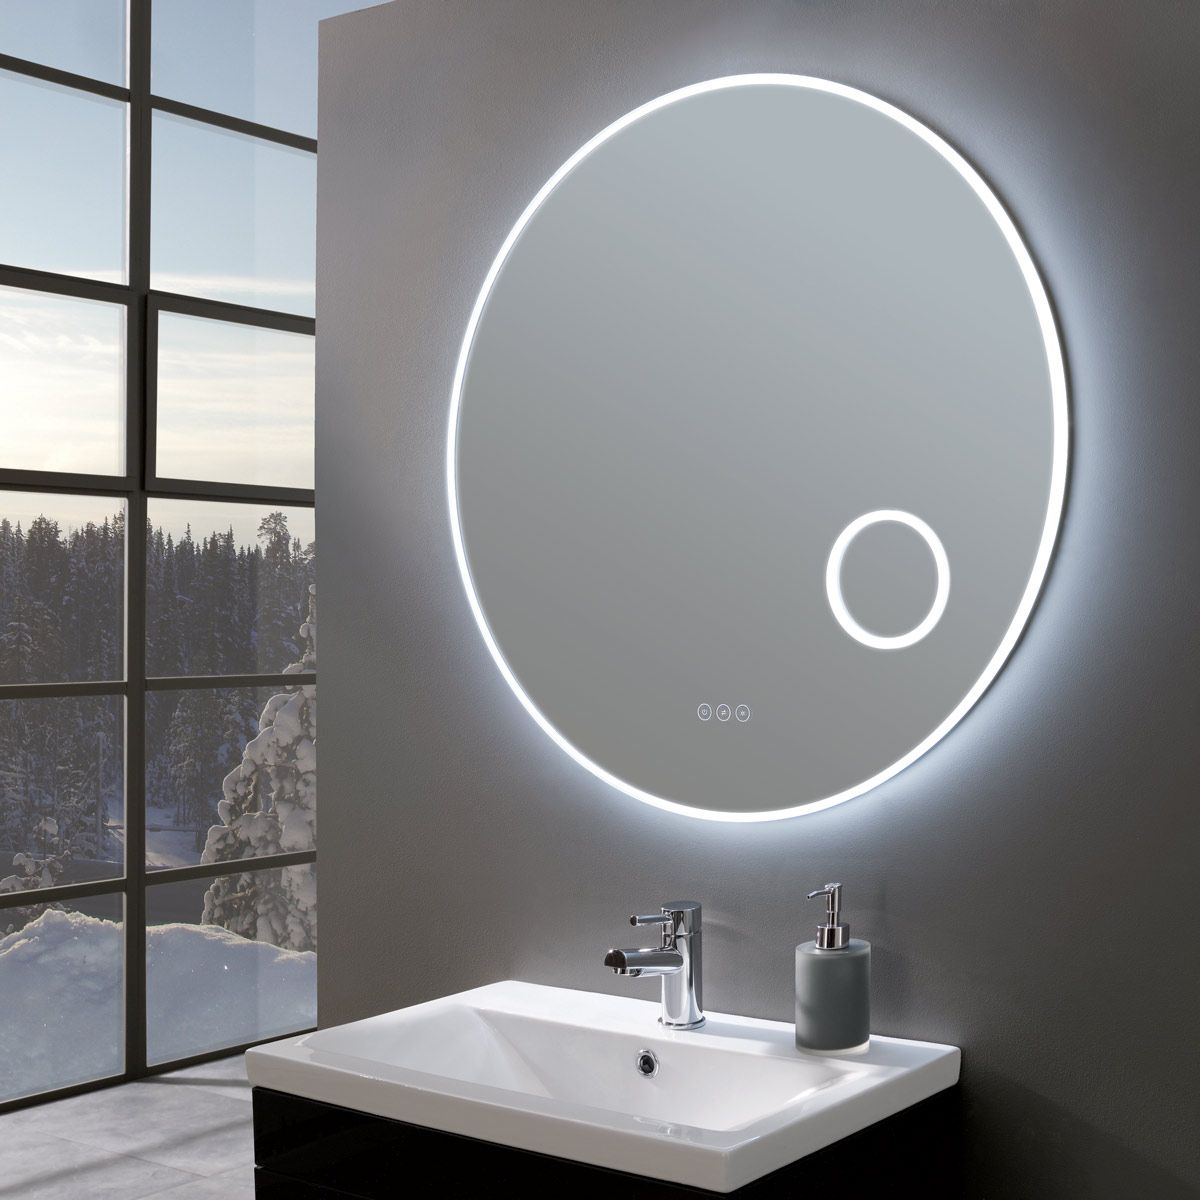 Ultra Slim Round Led Illuminated Mirror, Bathroom Mirror With Built In Magnifier